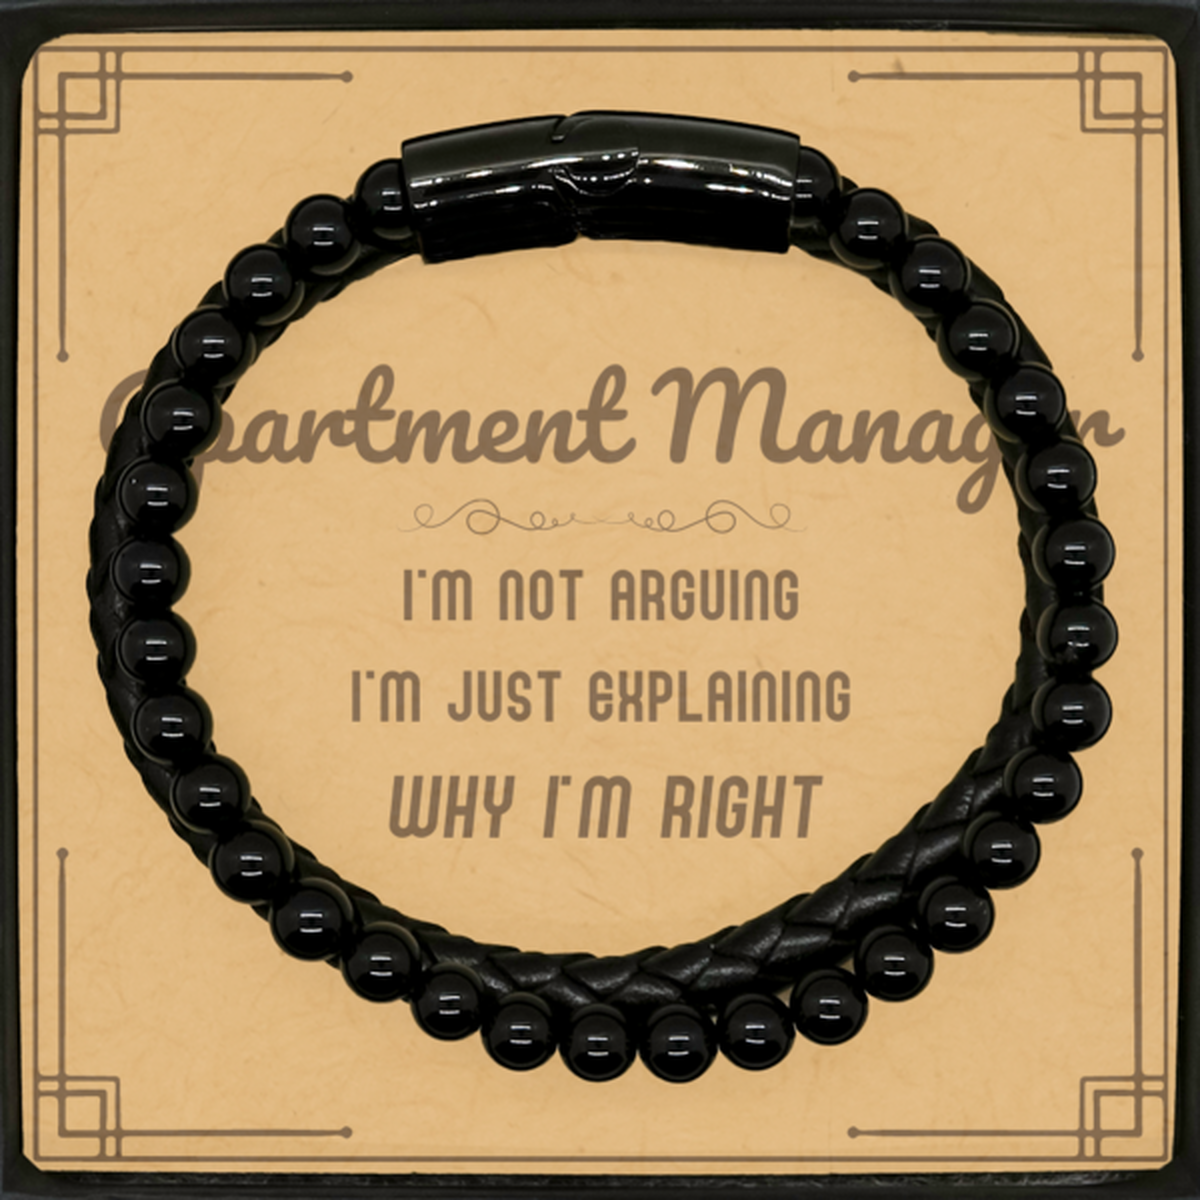 Apartment Manager I'm not Arguing. I'm Just Explaining Why I'm RIGHT Stone Leather Bracelets, Funny Saying Quote Apartment Manager Gifts For Apartment Manager Message Card Graduation Birthday Christmas Gifts for Men Women Coworker